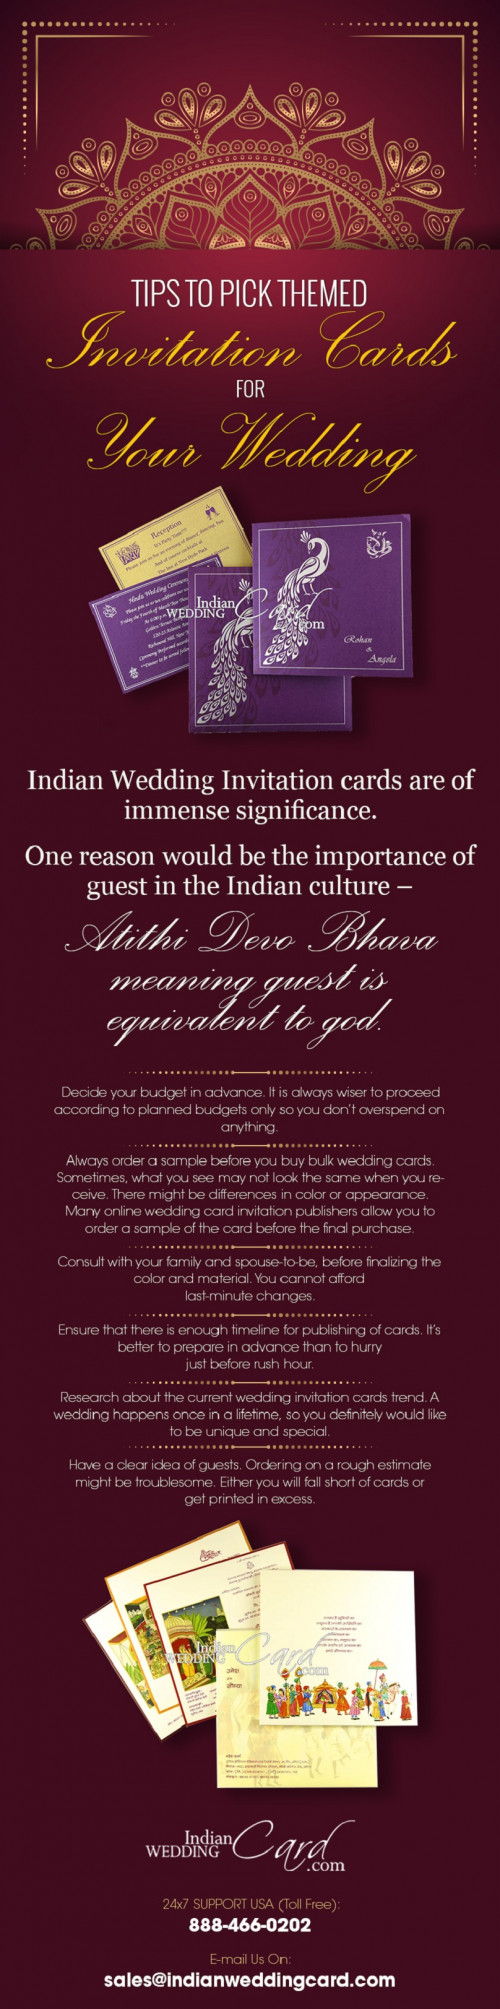 Tips-to-Pick-Themed-Invitation-Cards-For-Your-Wedding.jpg